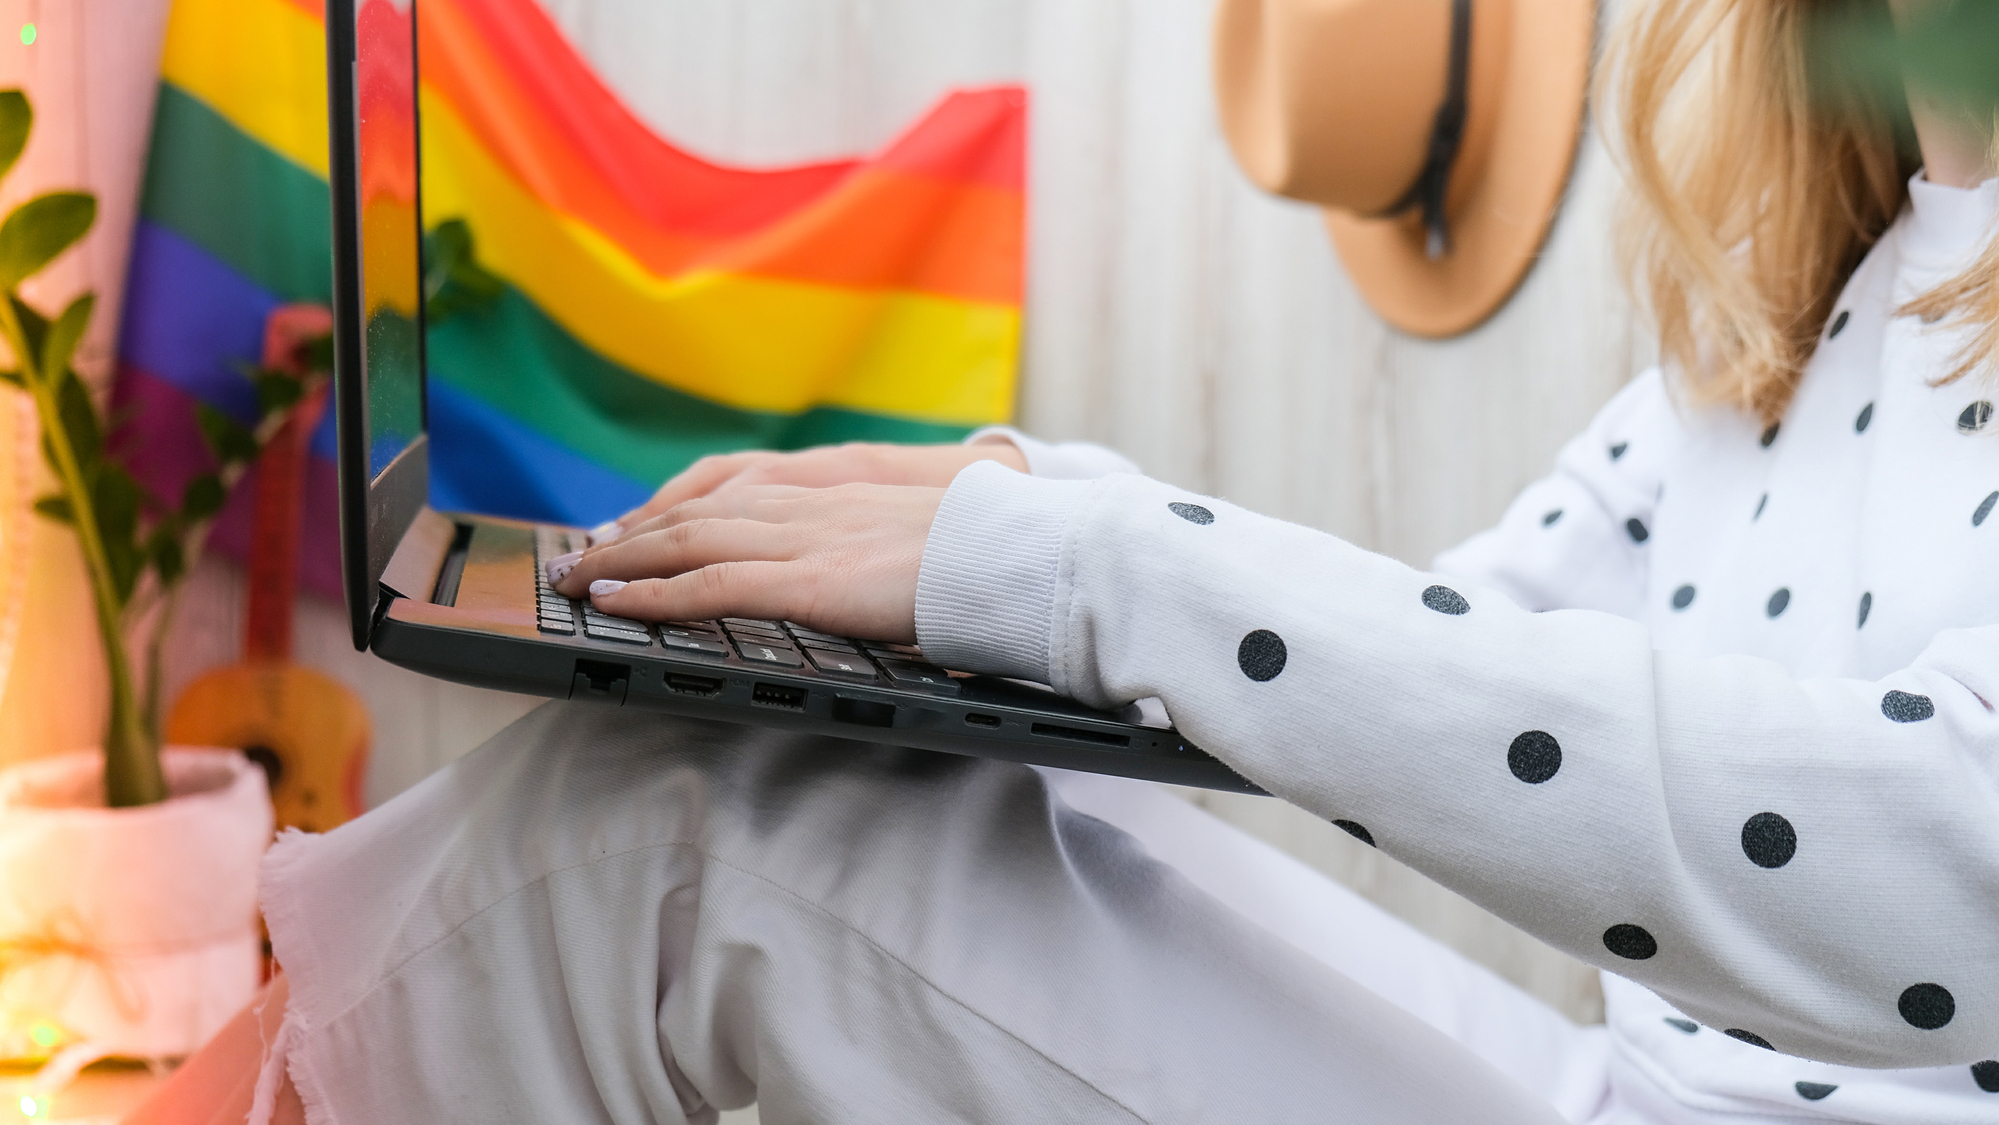 Twitter is the least safe social media site for LGBTQ people, GLAAD says